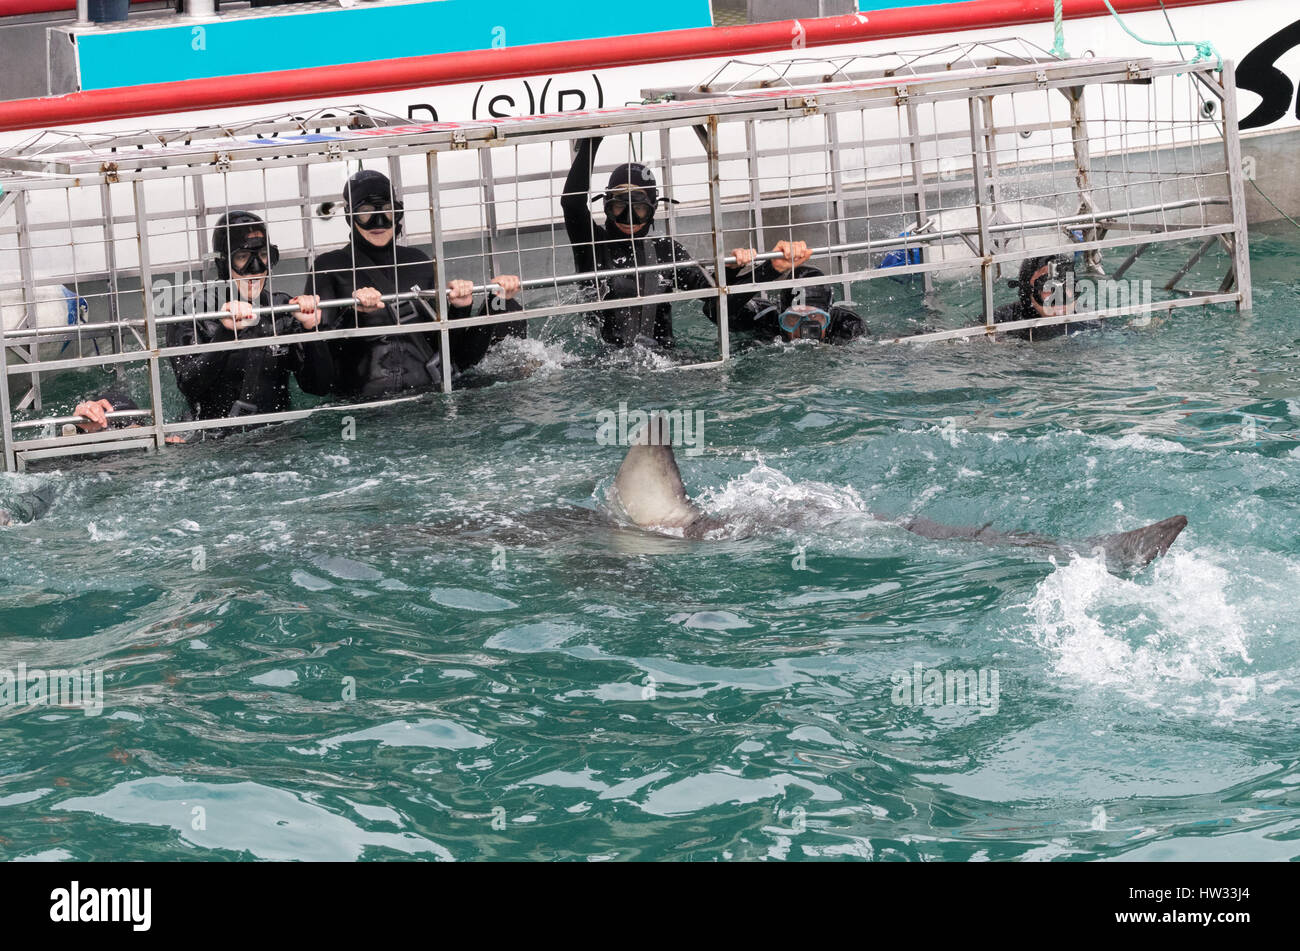 South Africa tourism; Tourists Shark Cage diving, with a great white shark; Gansbaai, Hermanus, Western Cape, South Africa Stock Photo